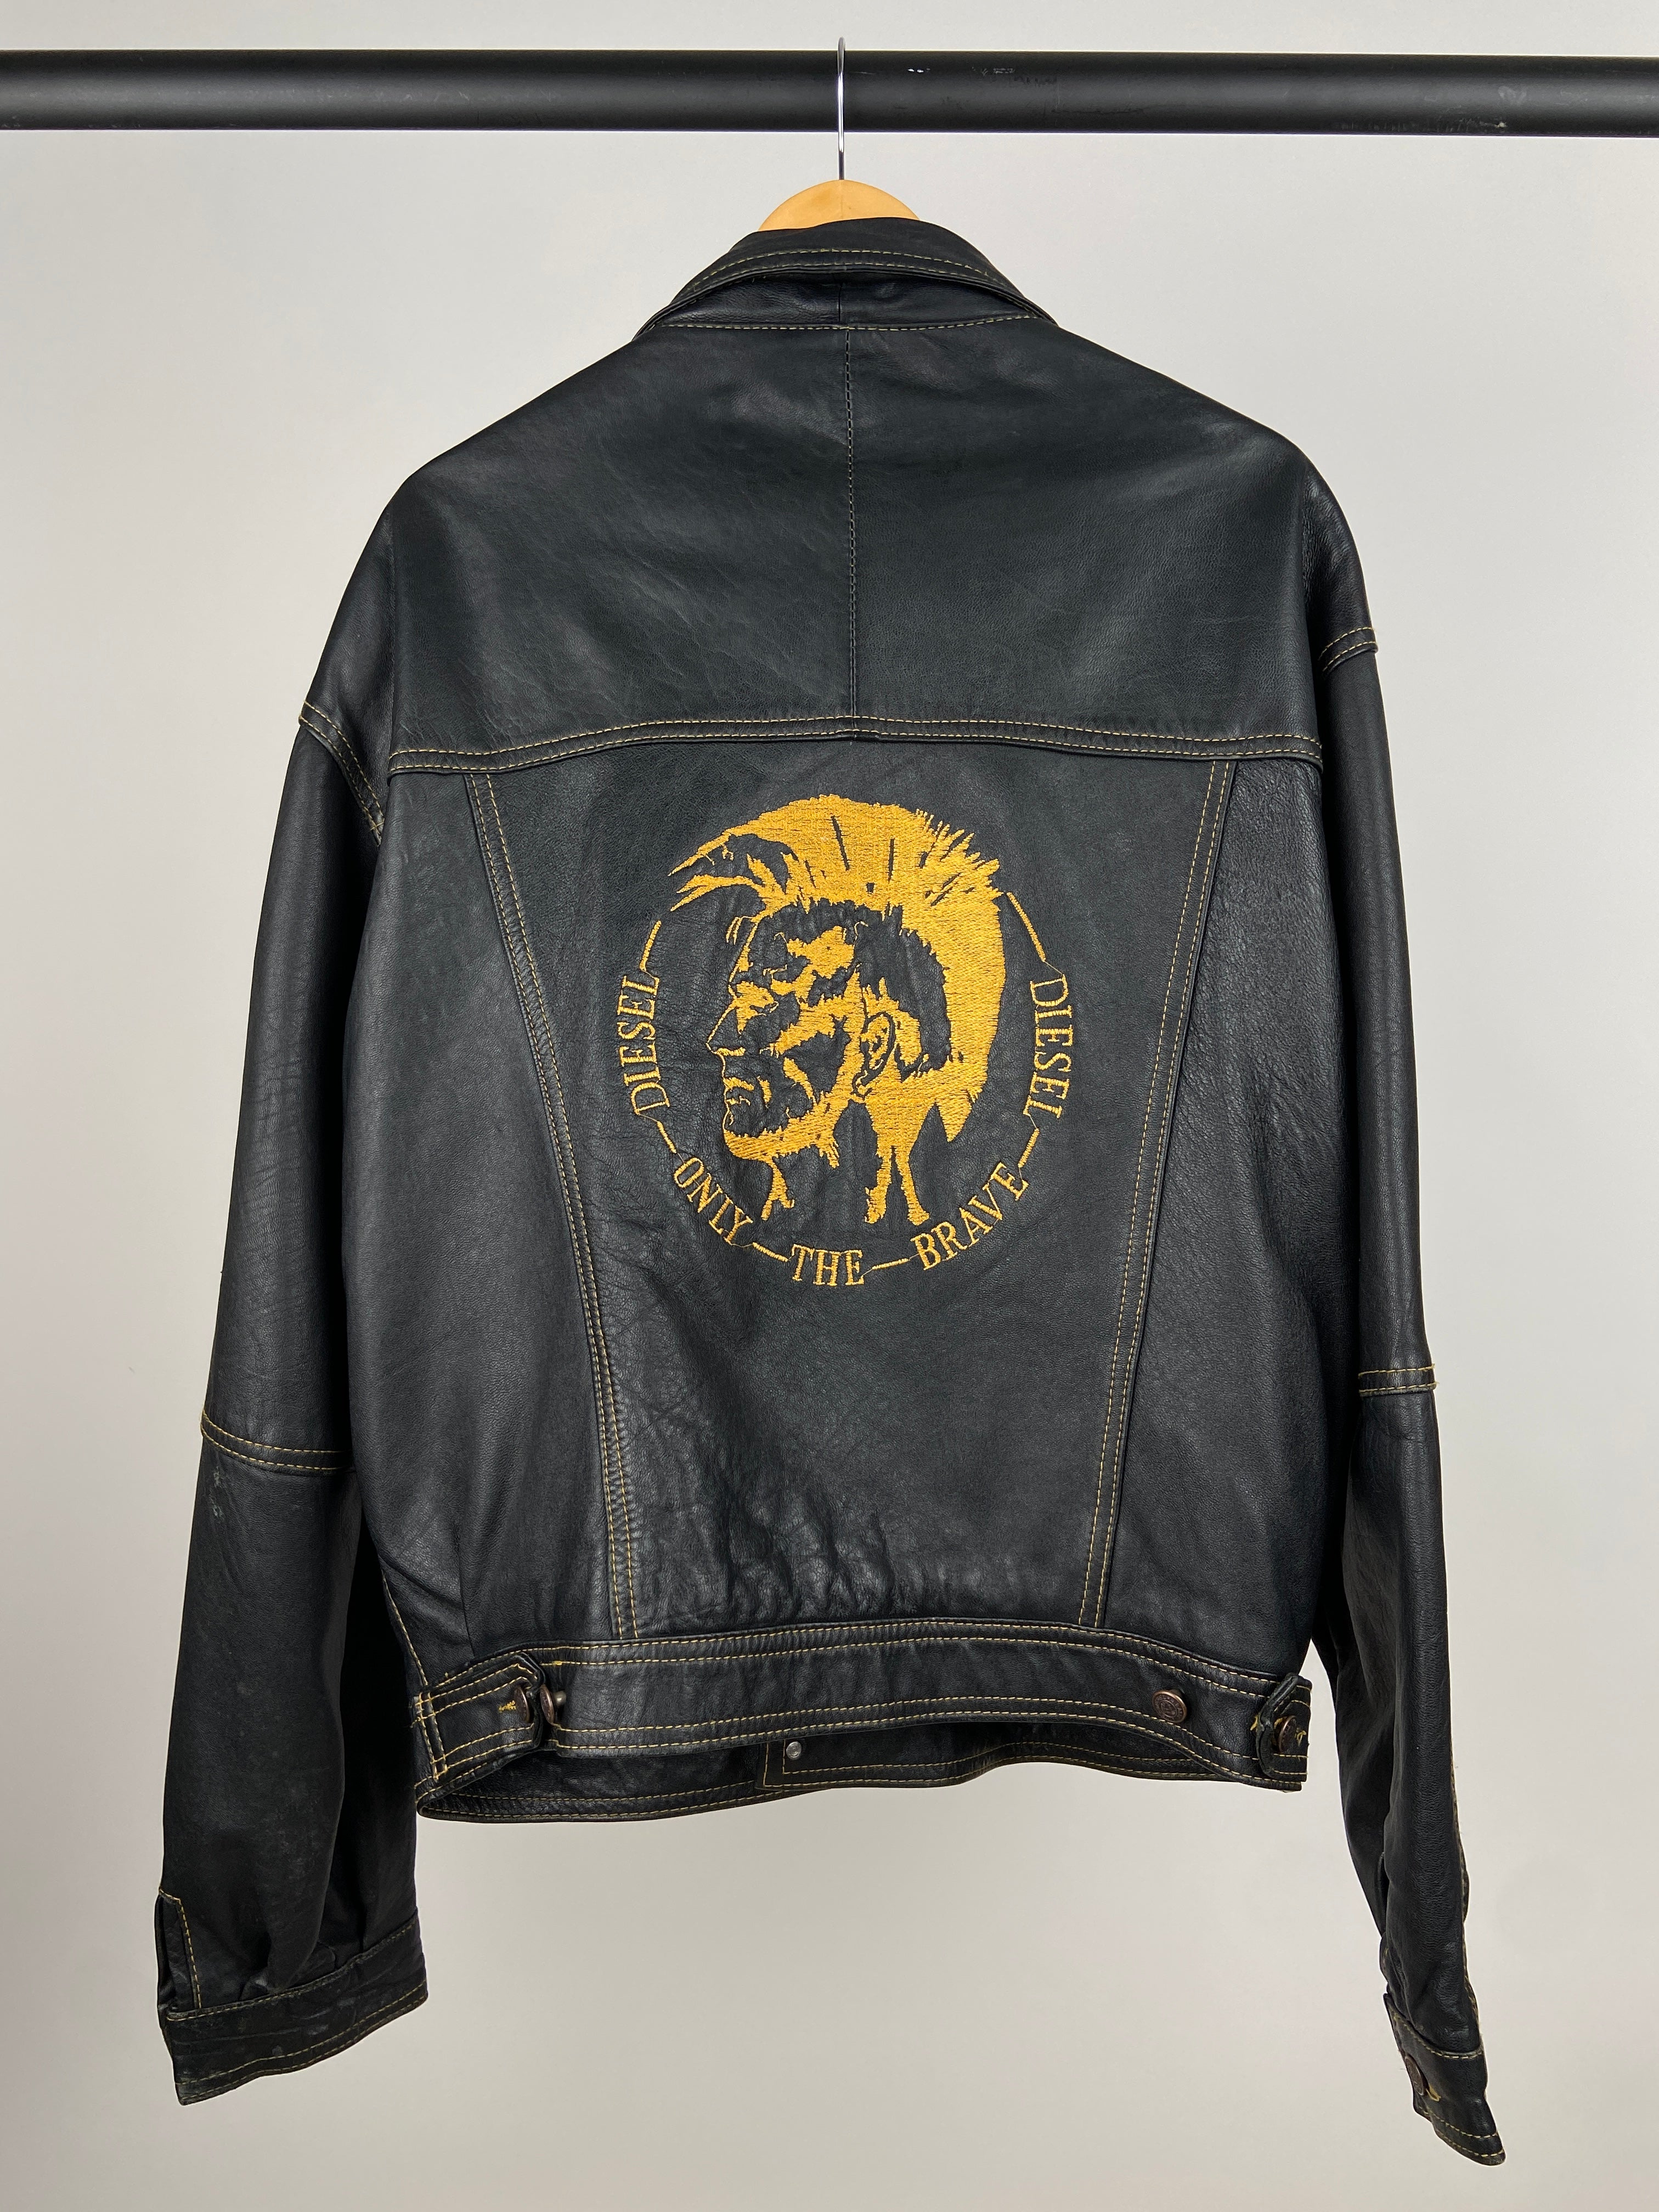 Diesel ‘Only The Brave’ 90s Leather Jacket